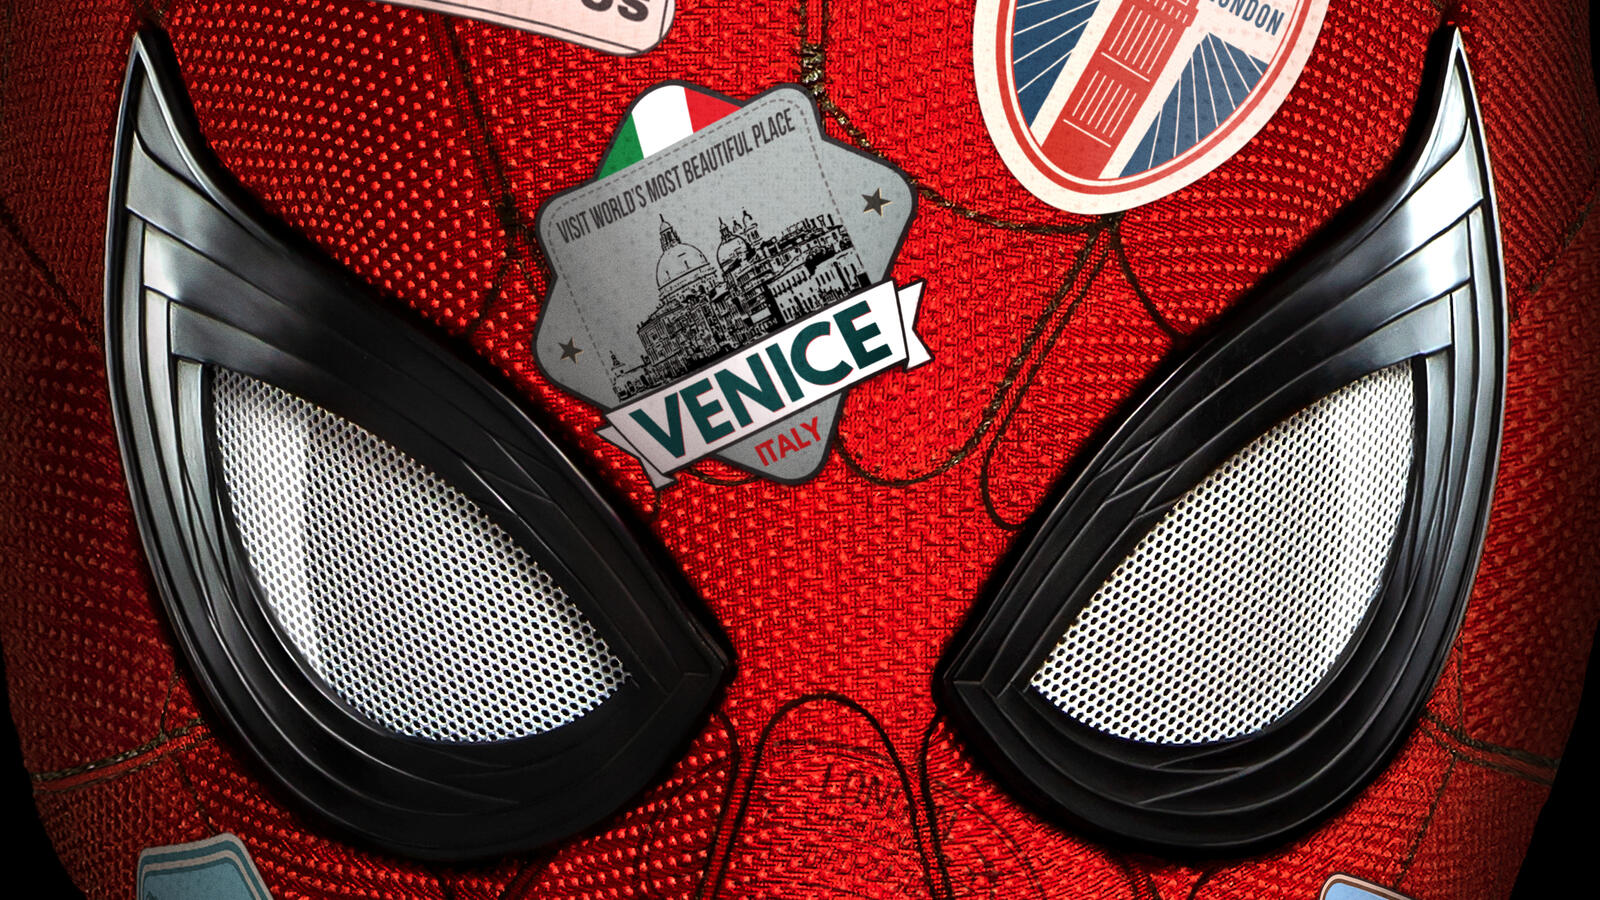 Wallpapers spiderman far from home close-up superheroes on the desktop